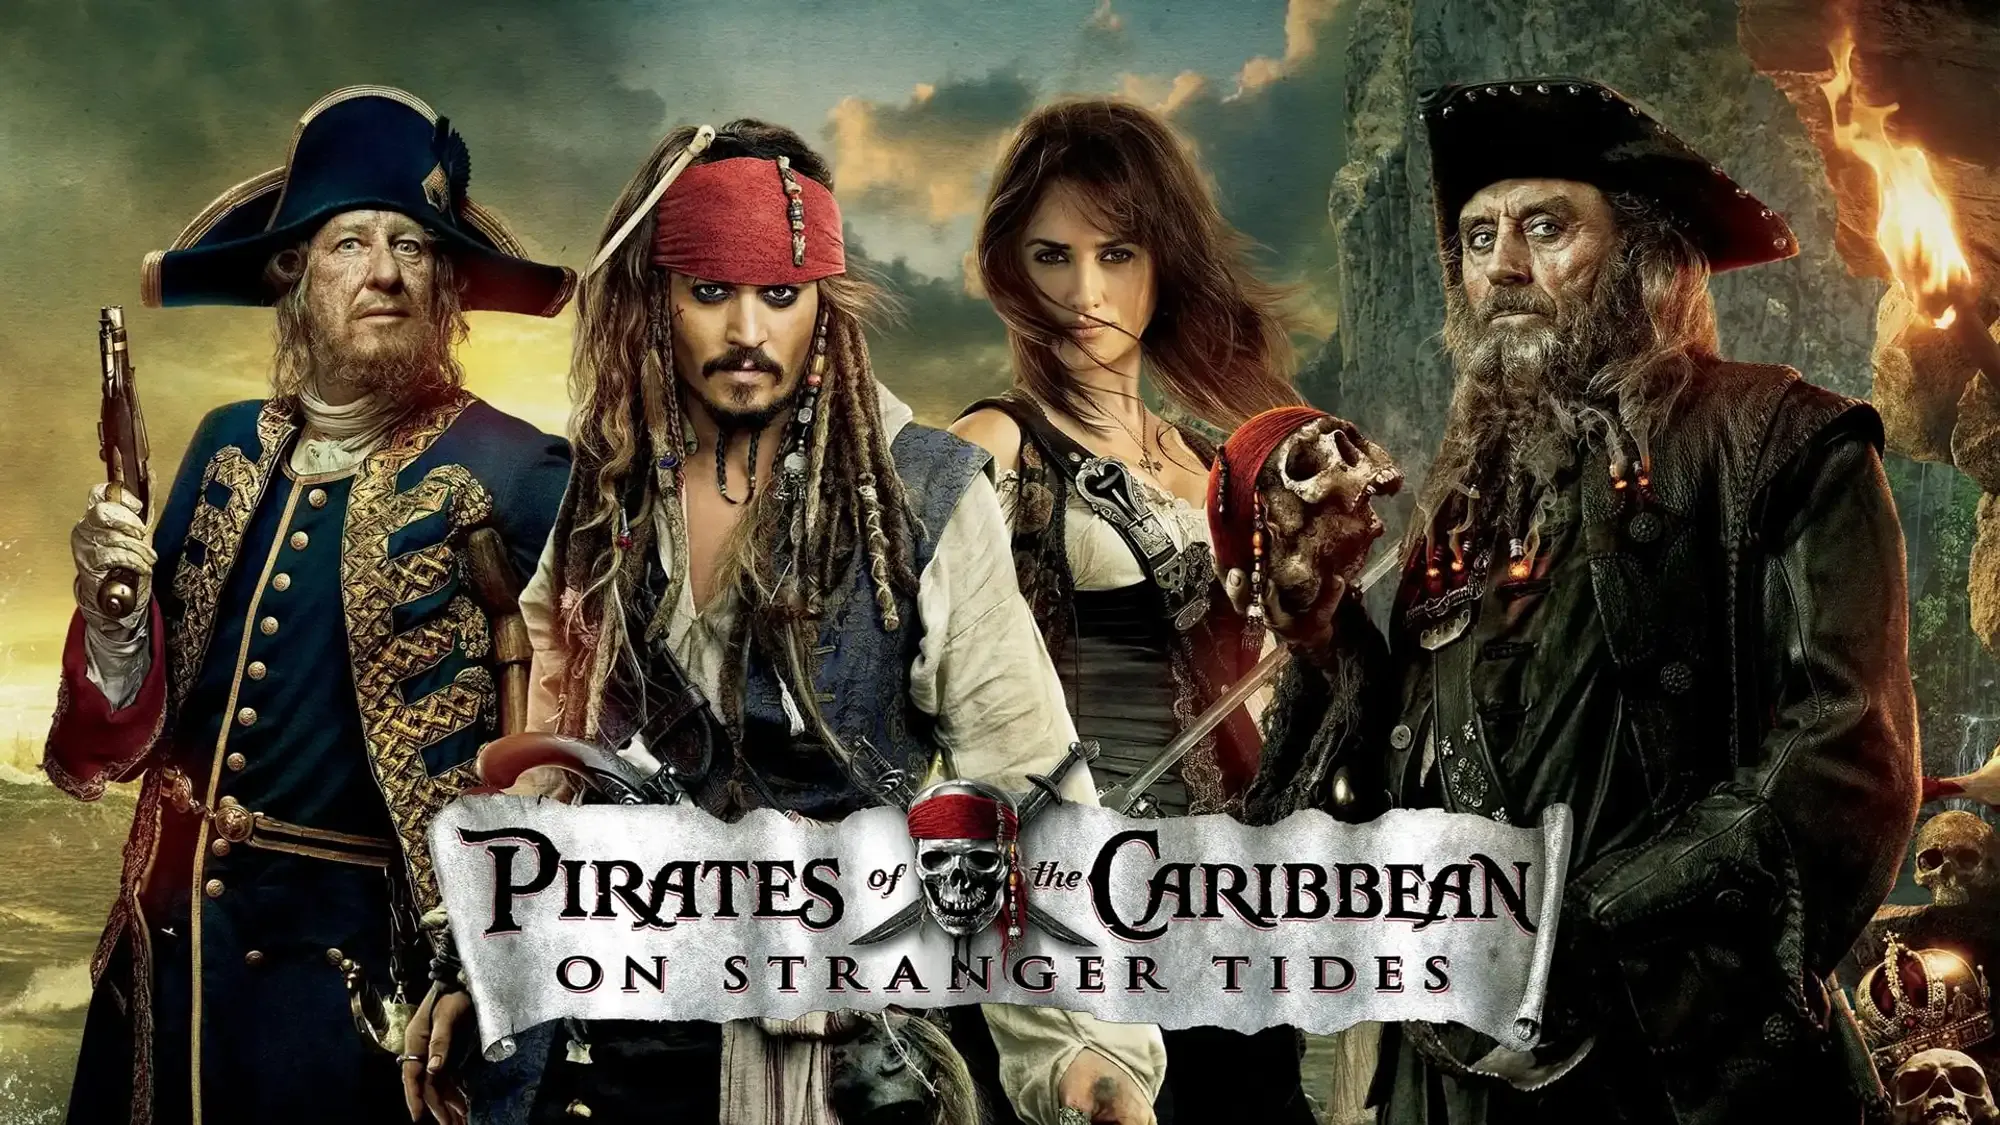 Pirates of the Caribbean: On Stranger Tides movie review